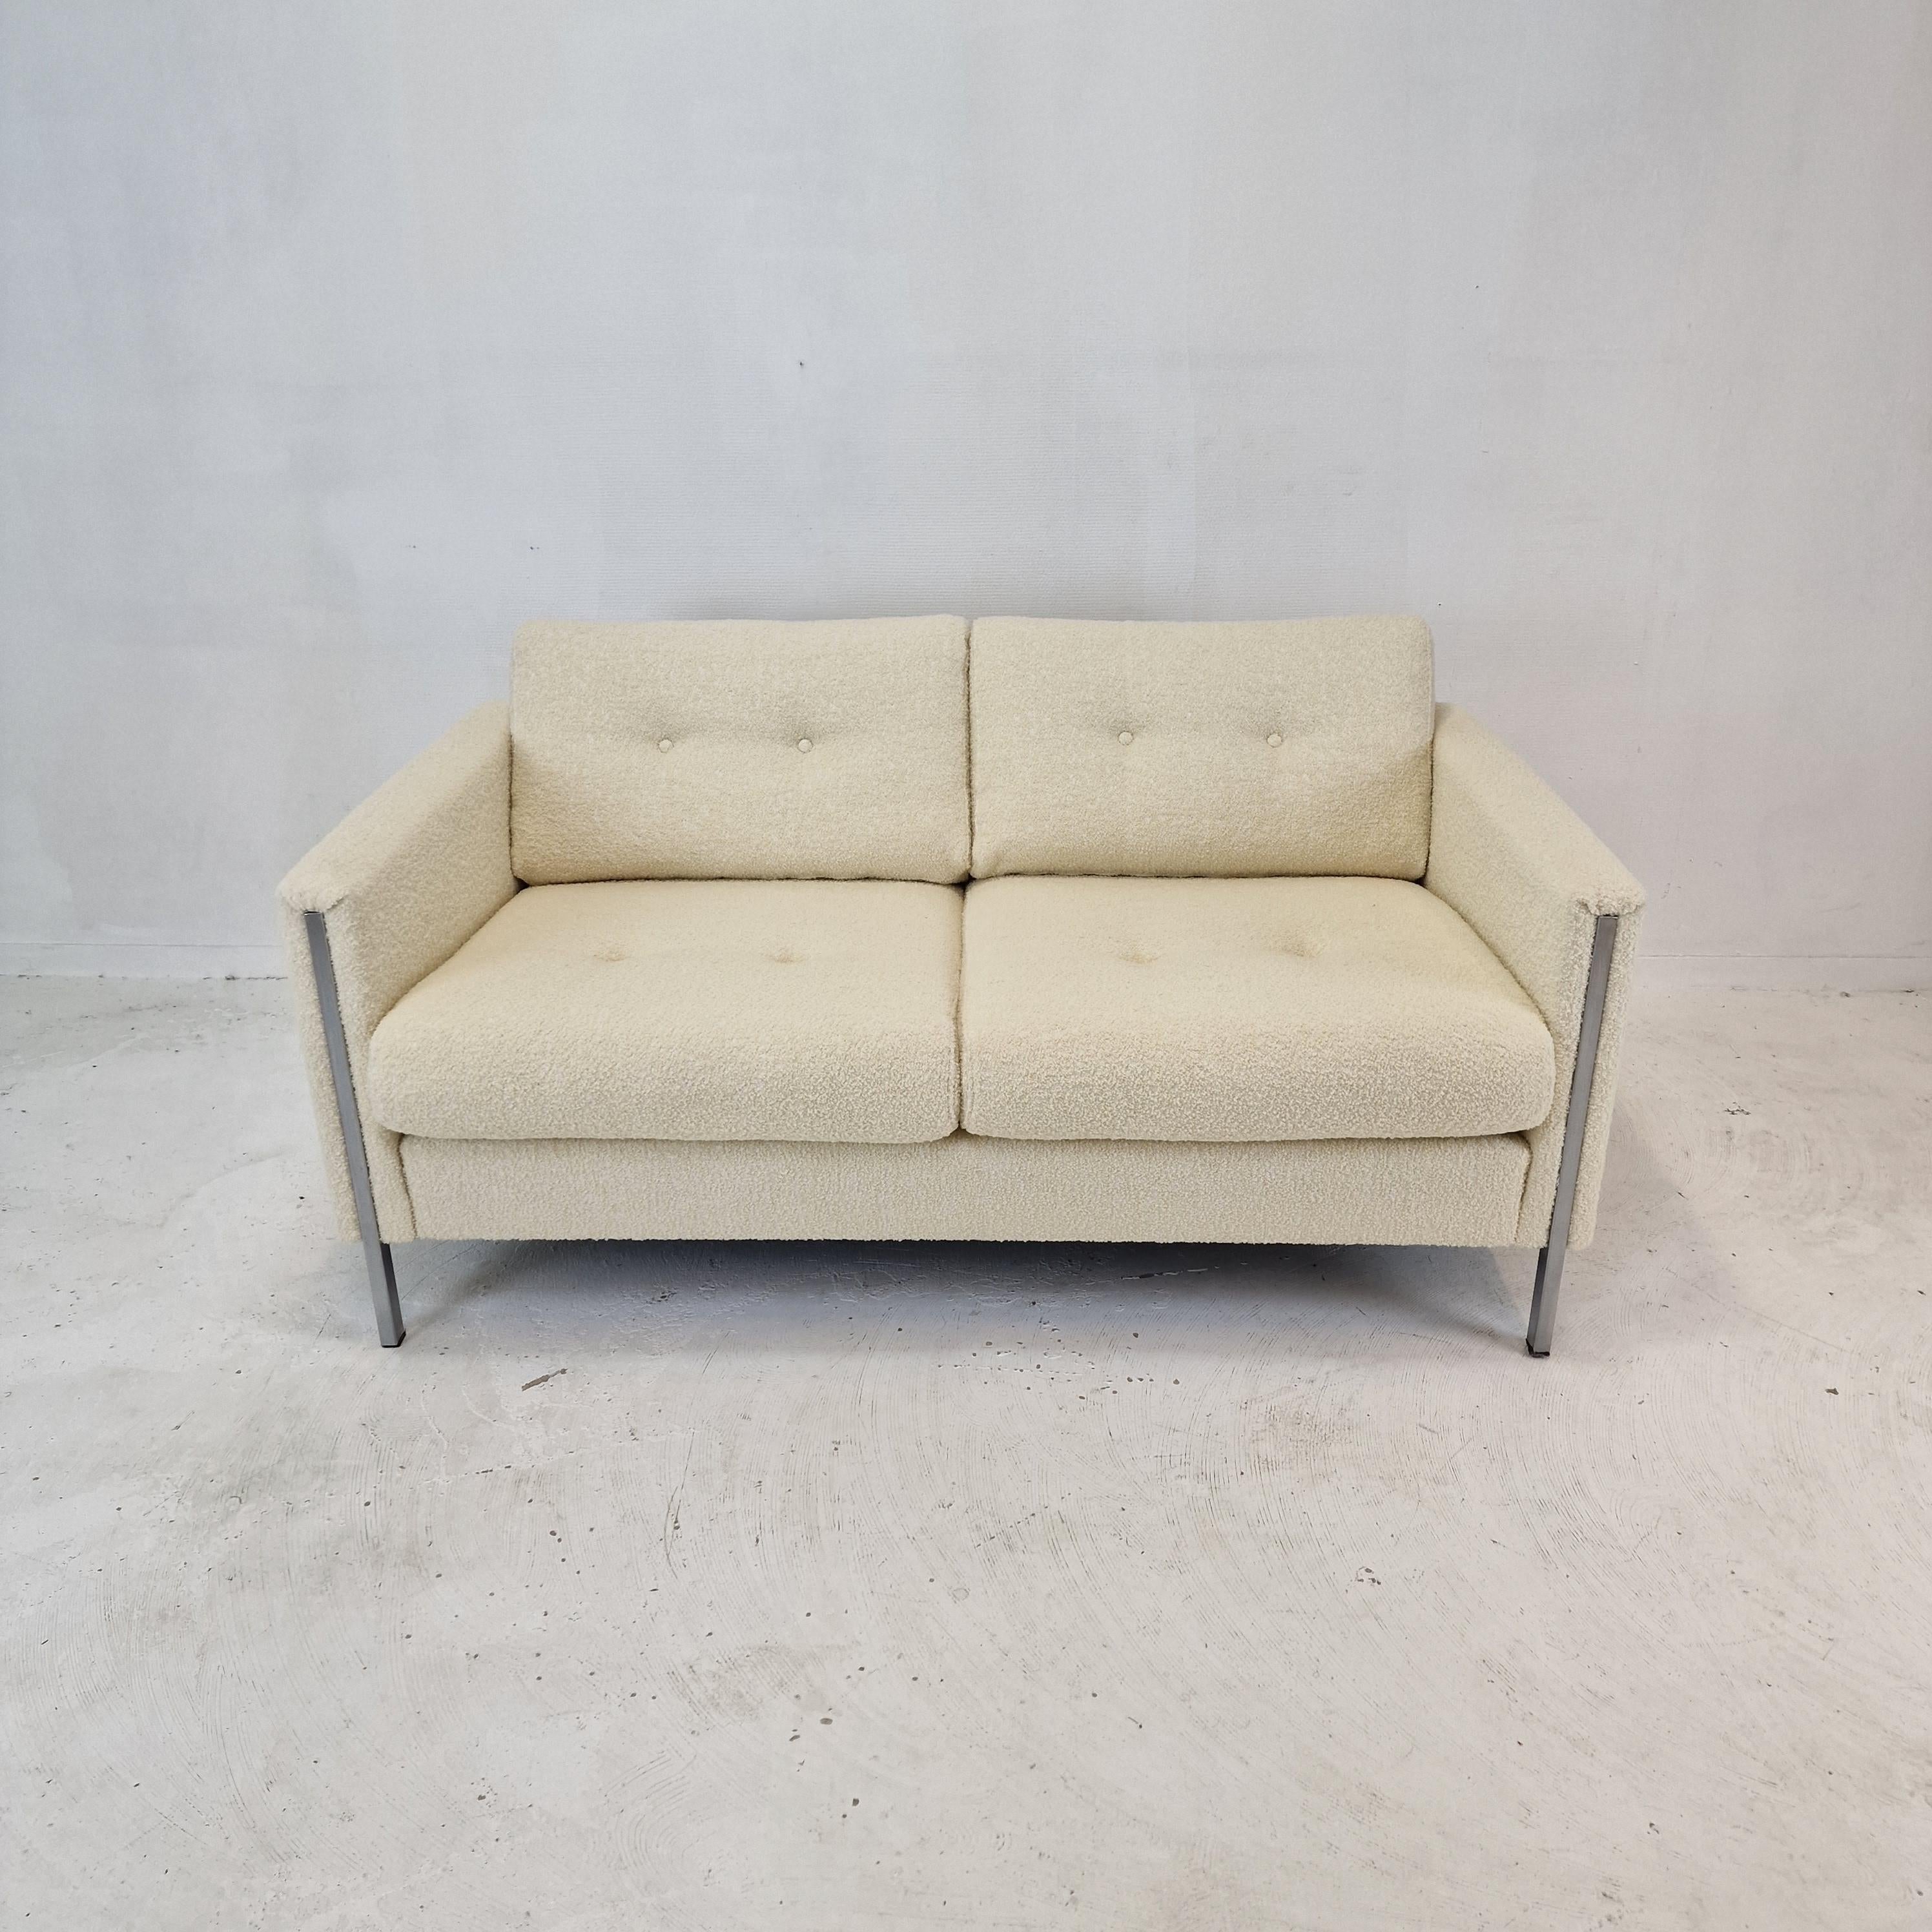 Dutch Midcentury 2-Seat Model 442 Sofa by Pierre Paulin for Artifort, 1960s For Sale